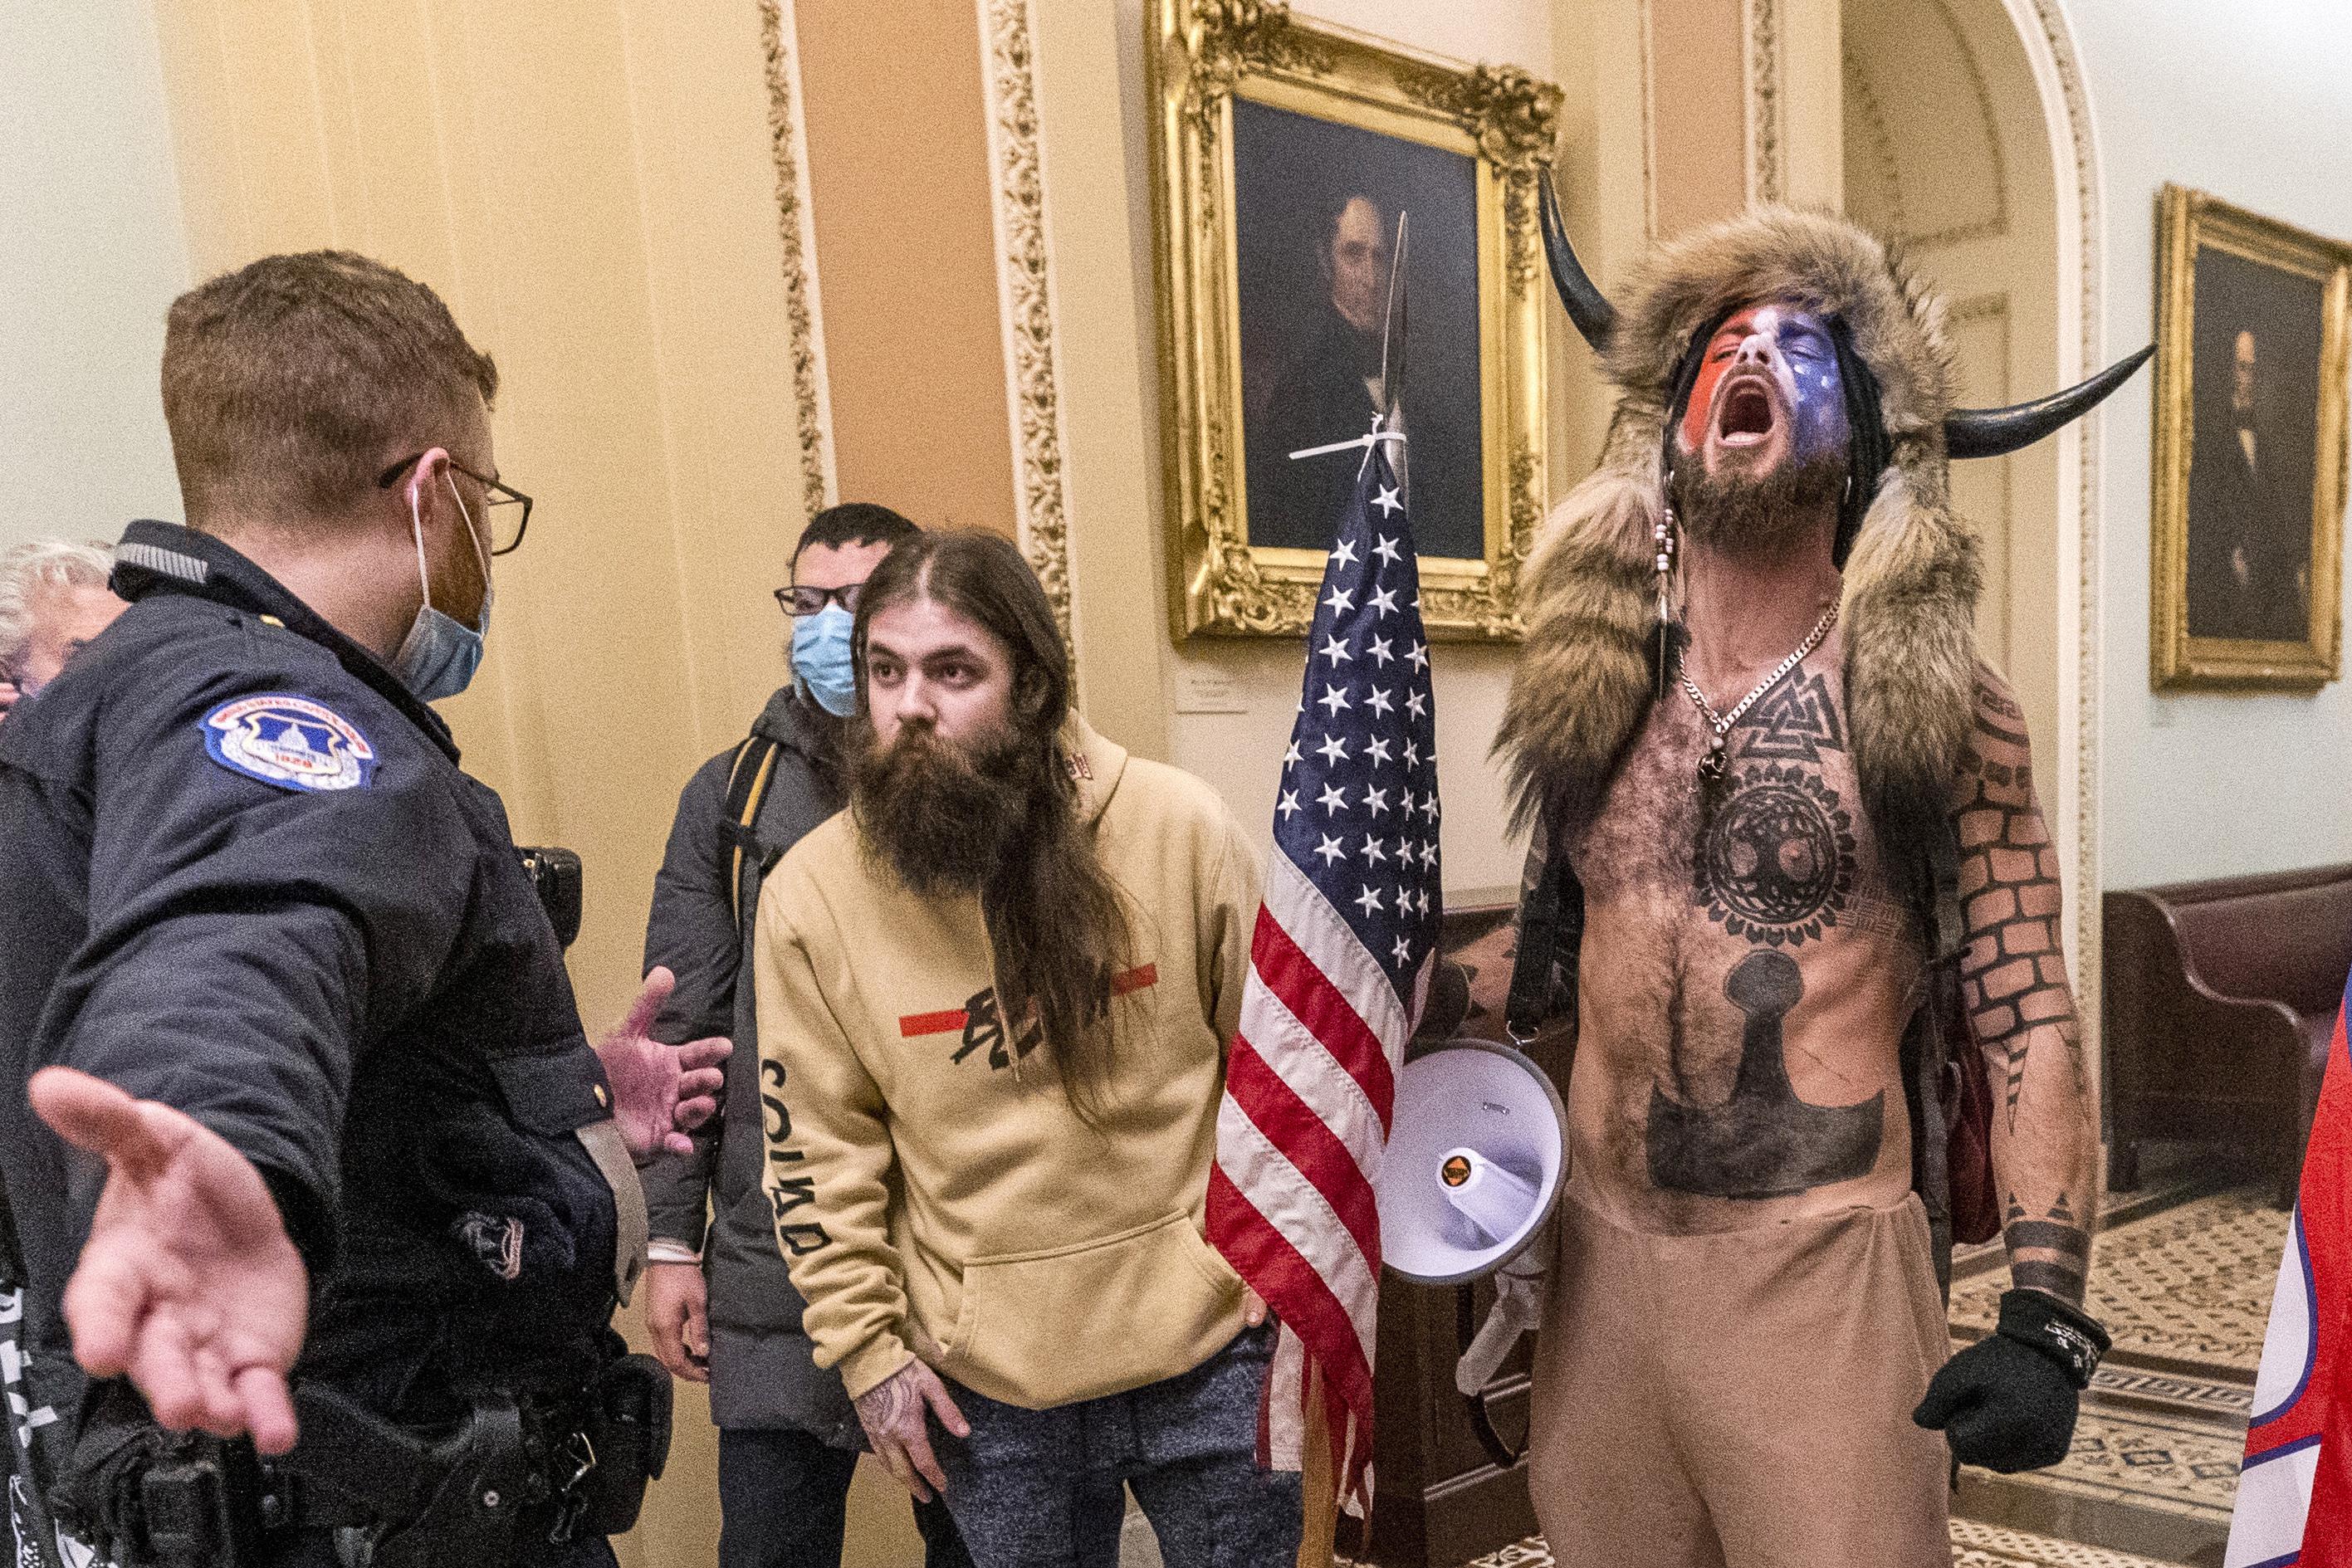 Man who wore horns in riot apologizes for storming Capitol